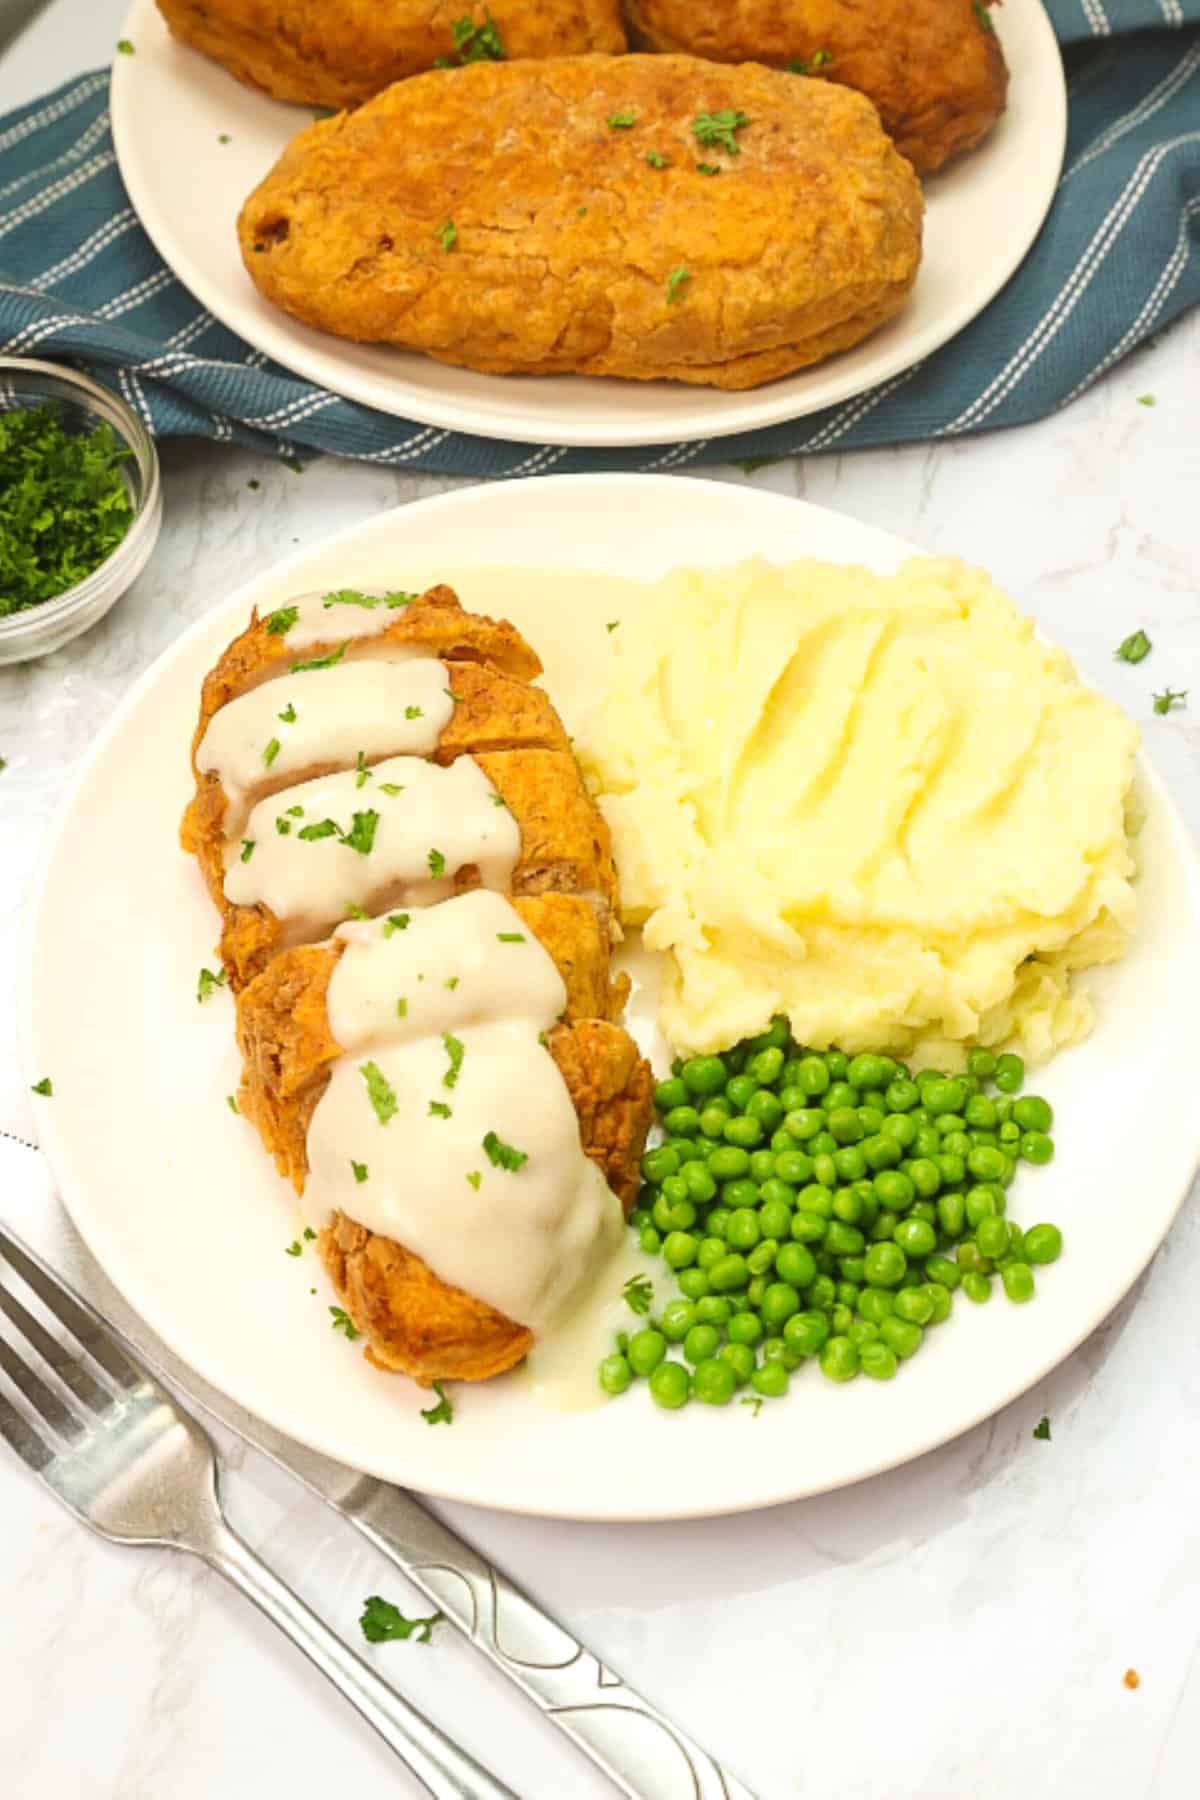 Enjoying pure comfort food with fried chicken breasts, mashed potatoes and satisfying peas